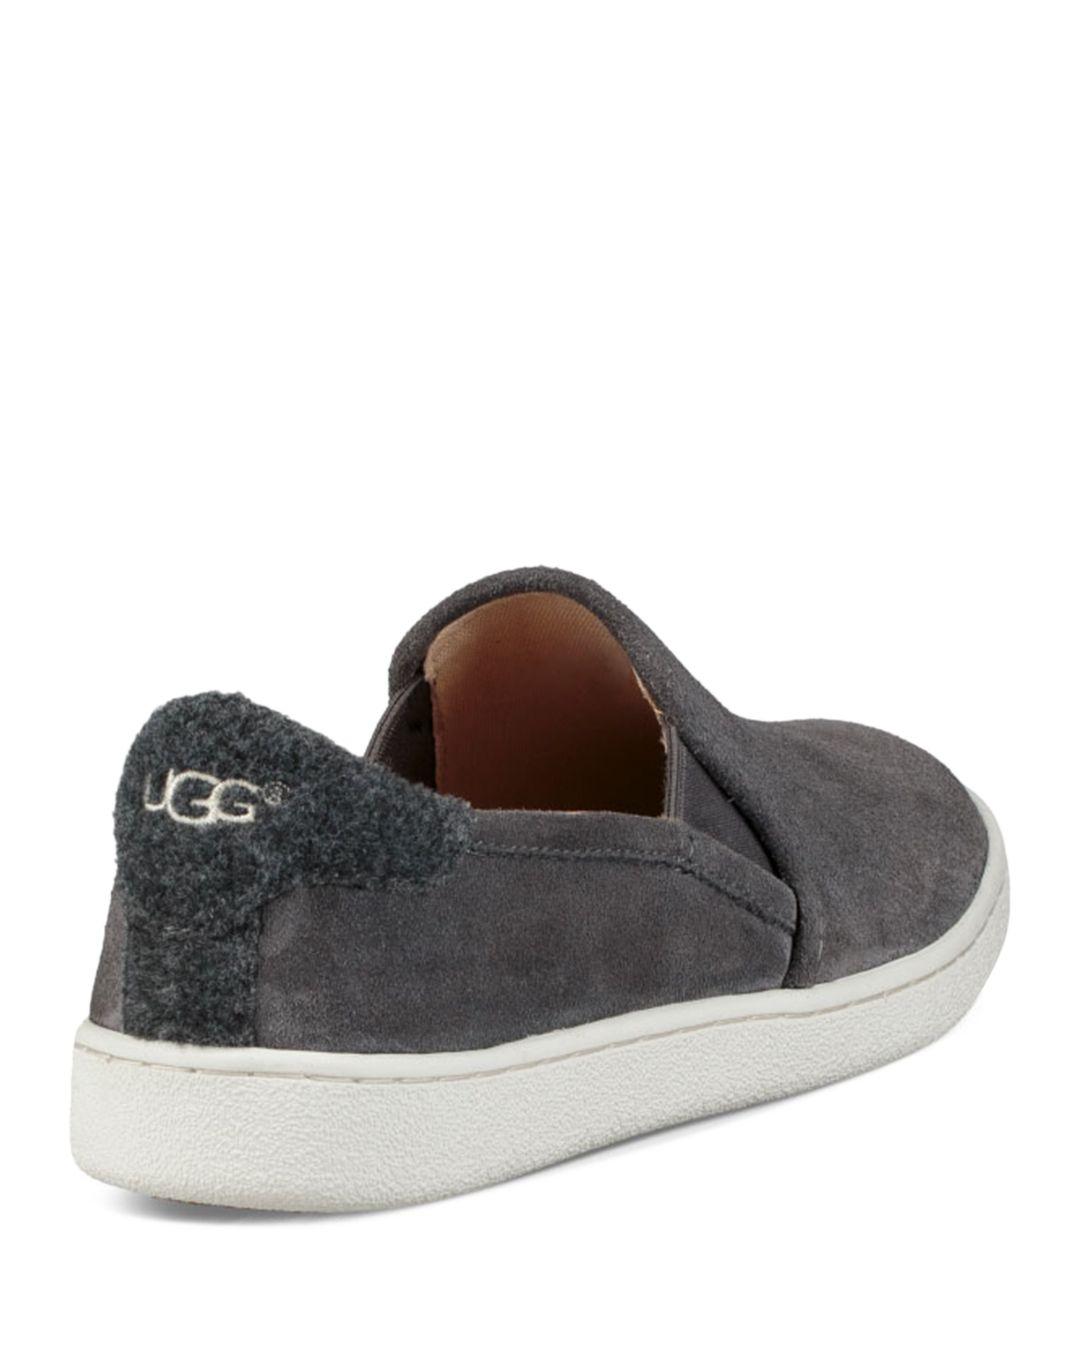 Ugg Cas Sneaker Clearance Selling, 49% OFF | lamphitrite-palace.com